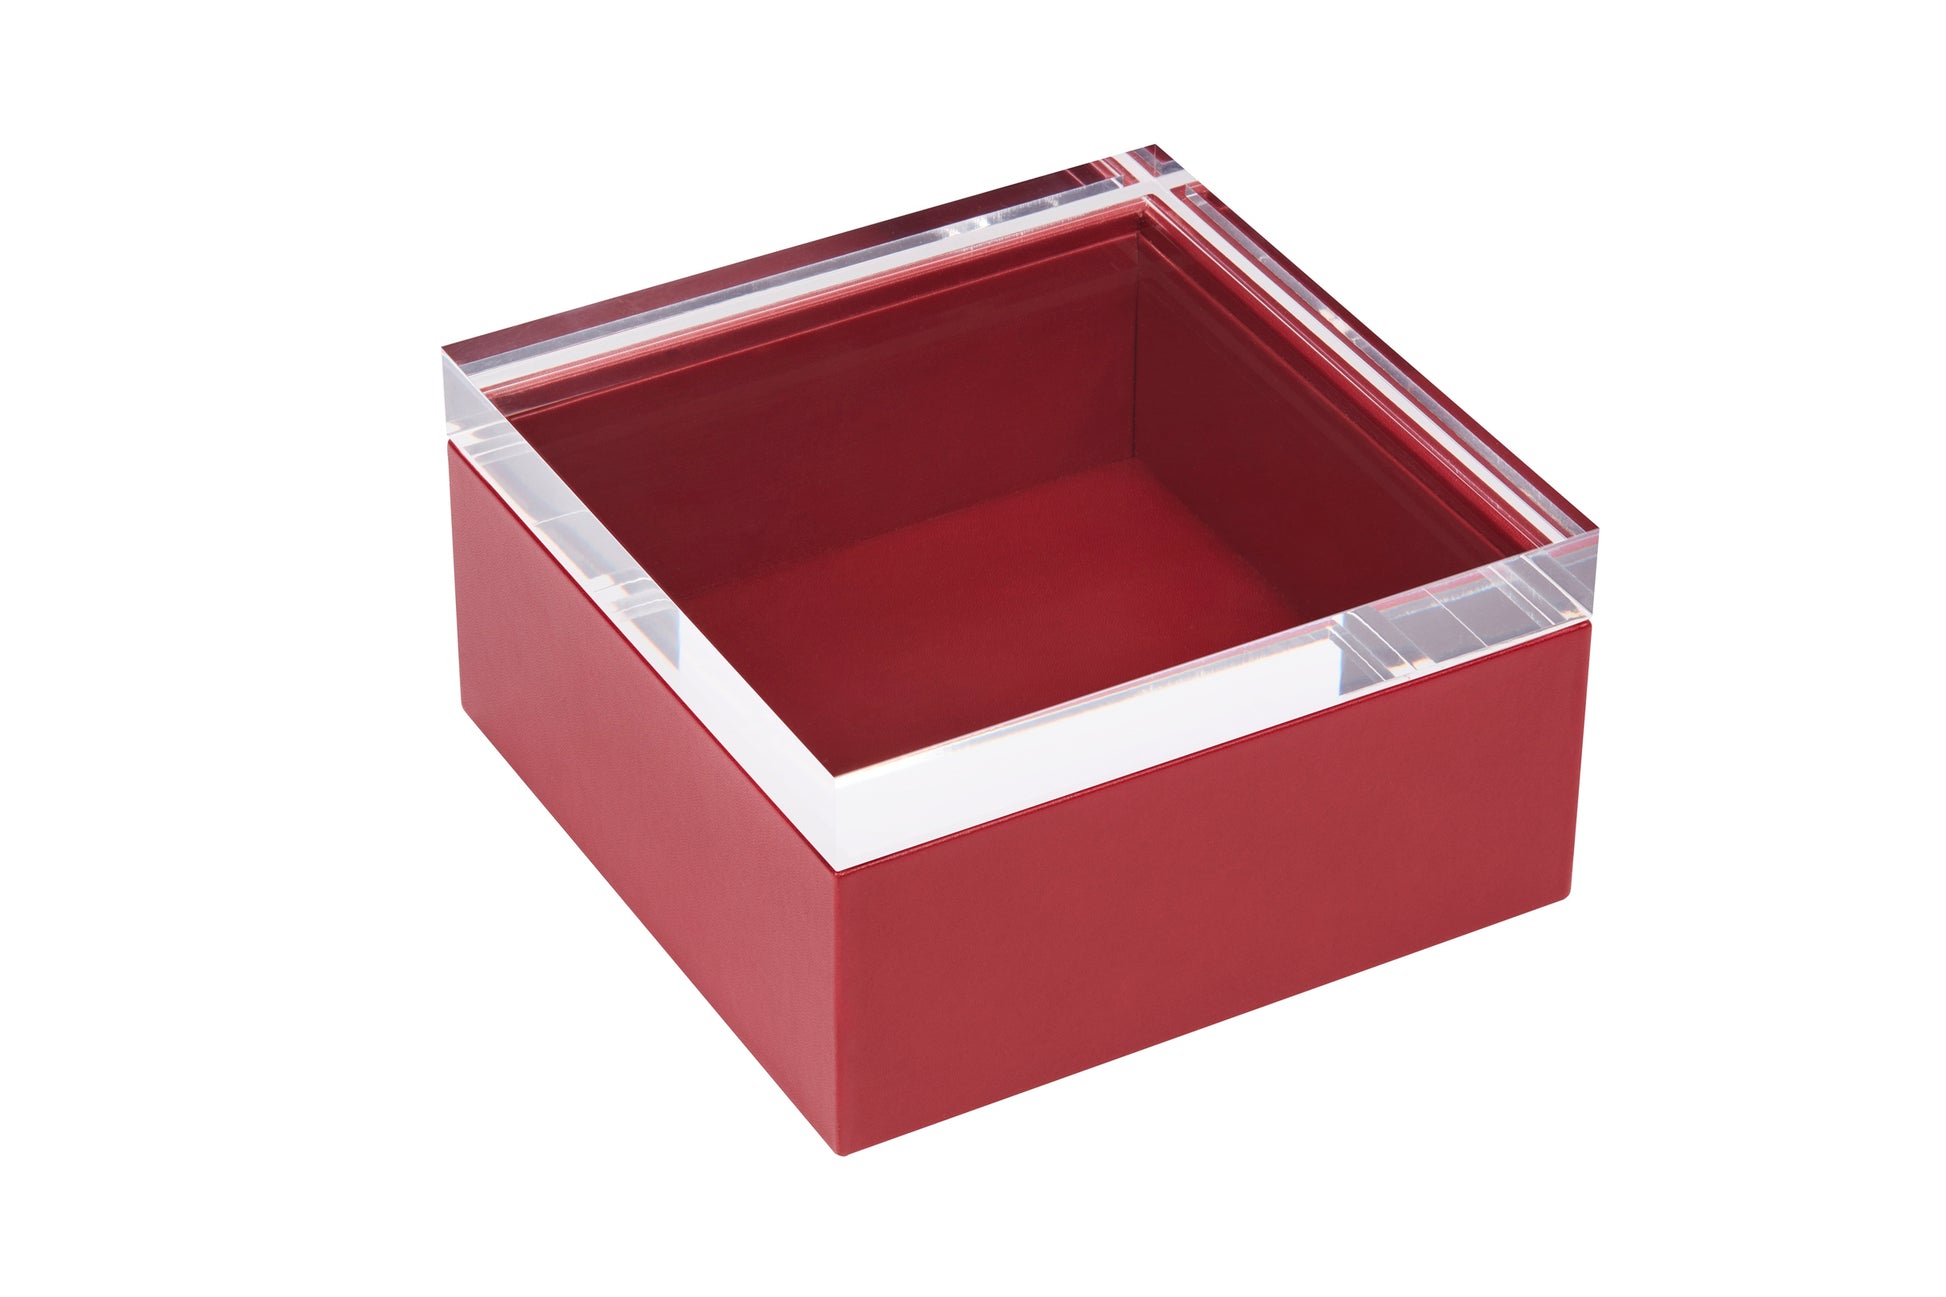 Riviere Febe Leather-Covered Jewellery Box with Removable Tray | Elegant Design with Removable Tray for Organizing Jewelry | Suede Lining and Plain Acrylic Lid for Sophisticated Touch | Explore a Range of Luxury Jewellery Boxes at 2Jour Concierge, #1 luxury high-end gift & lifestyle shop